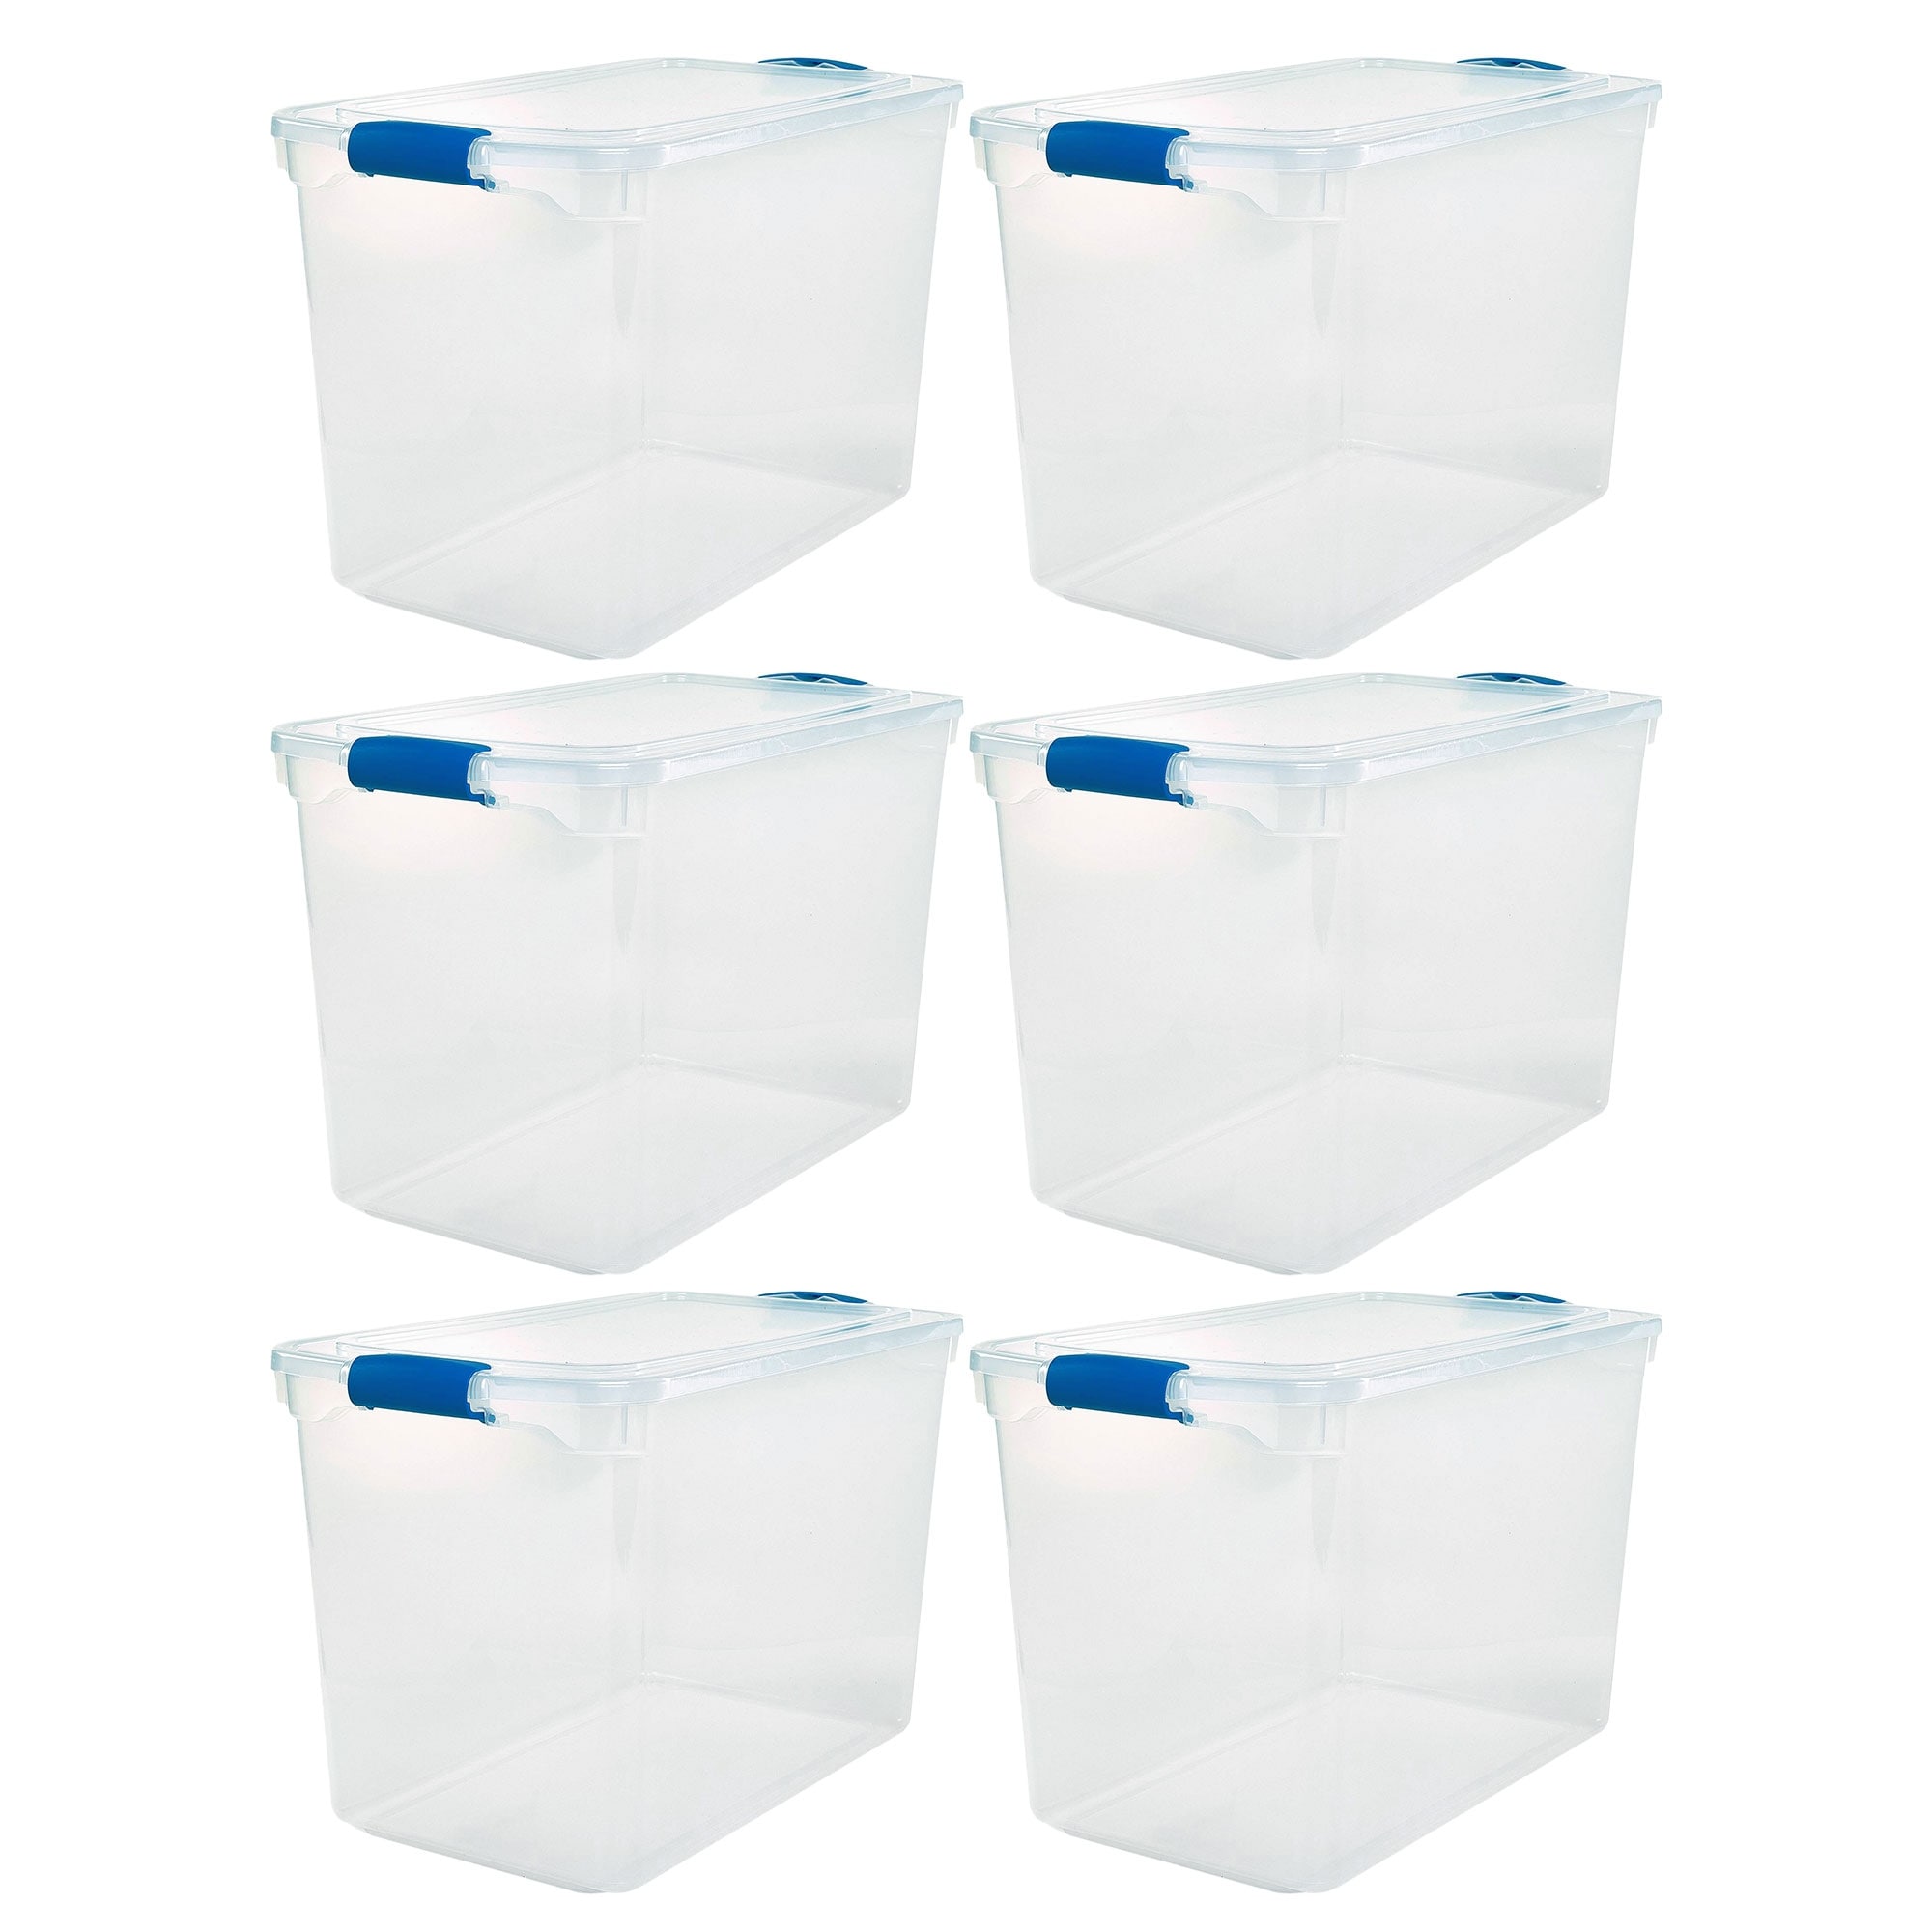 https://ak1.ostkcdn.com/images/products/is/images/direct/a5e421fead7634015bbb0dc04aed60e0e8f0a89c/Homz-112-Qt-Heavy-Duty-Clear-Plastic-Stackable-Storage-Bins%2C-6-Pack.jpg